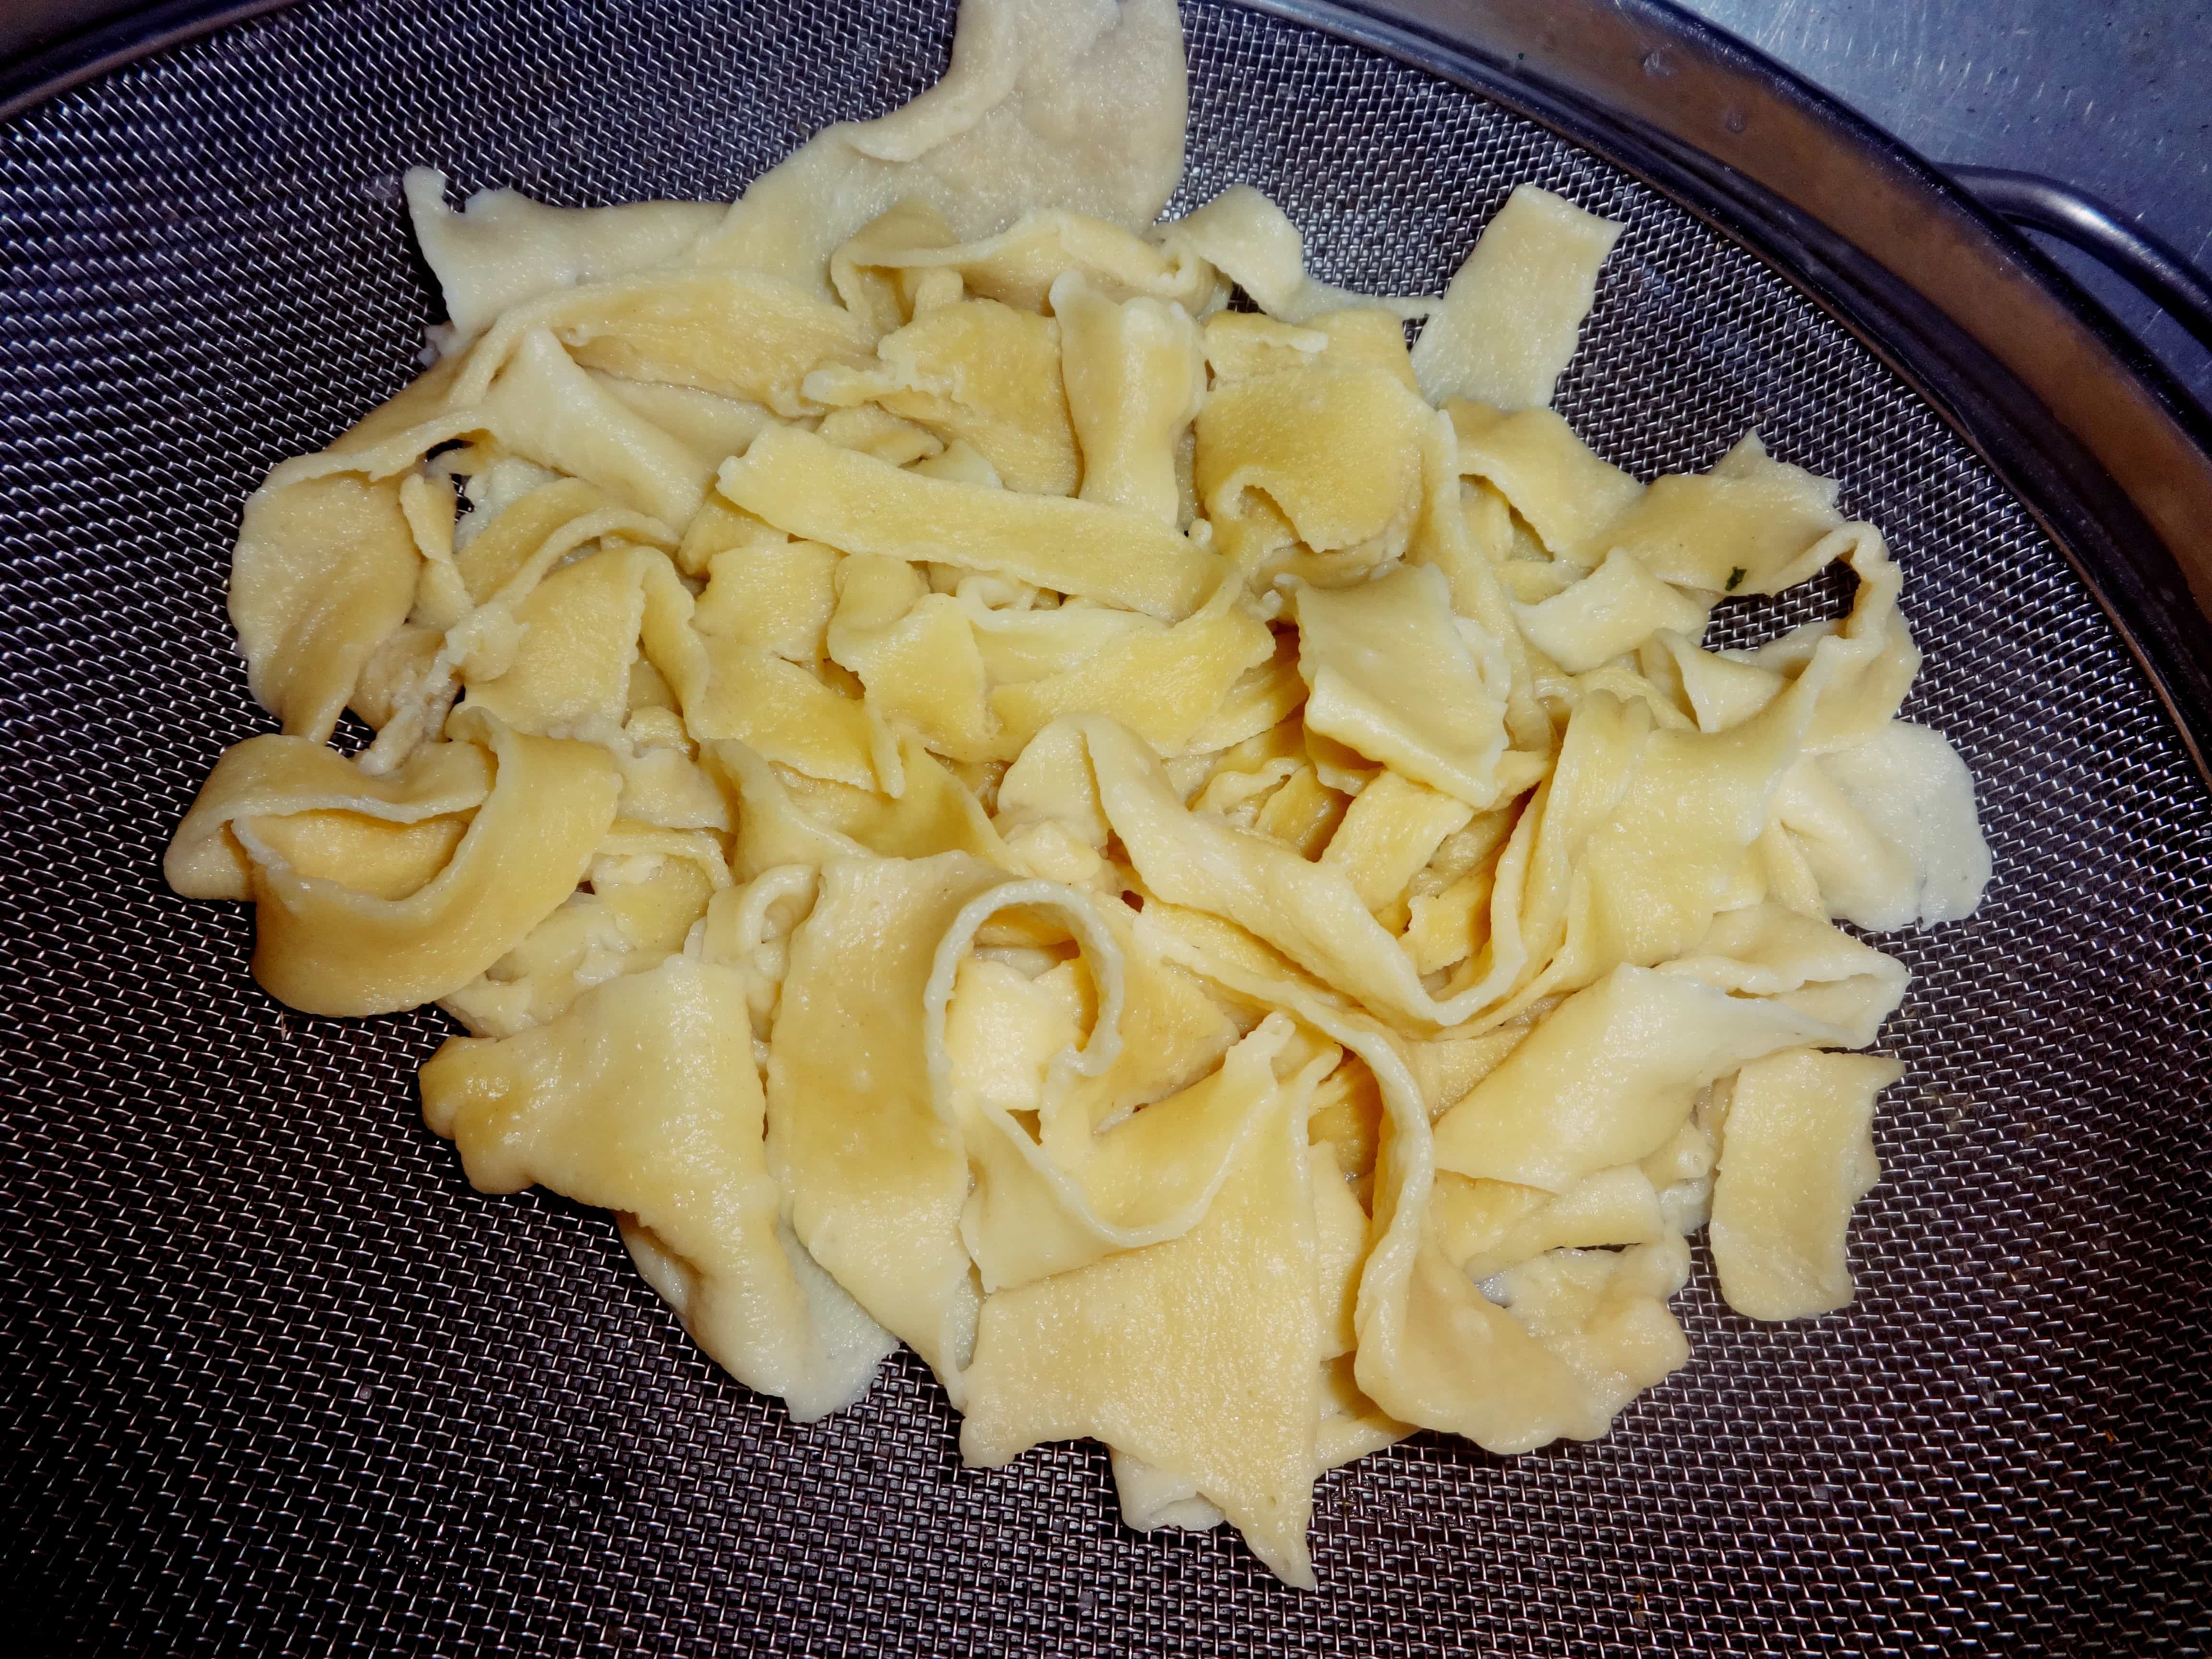 Homemade Fettuccine pasta from scratch with Bechamel sauce